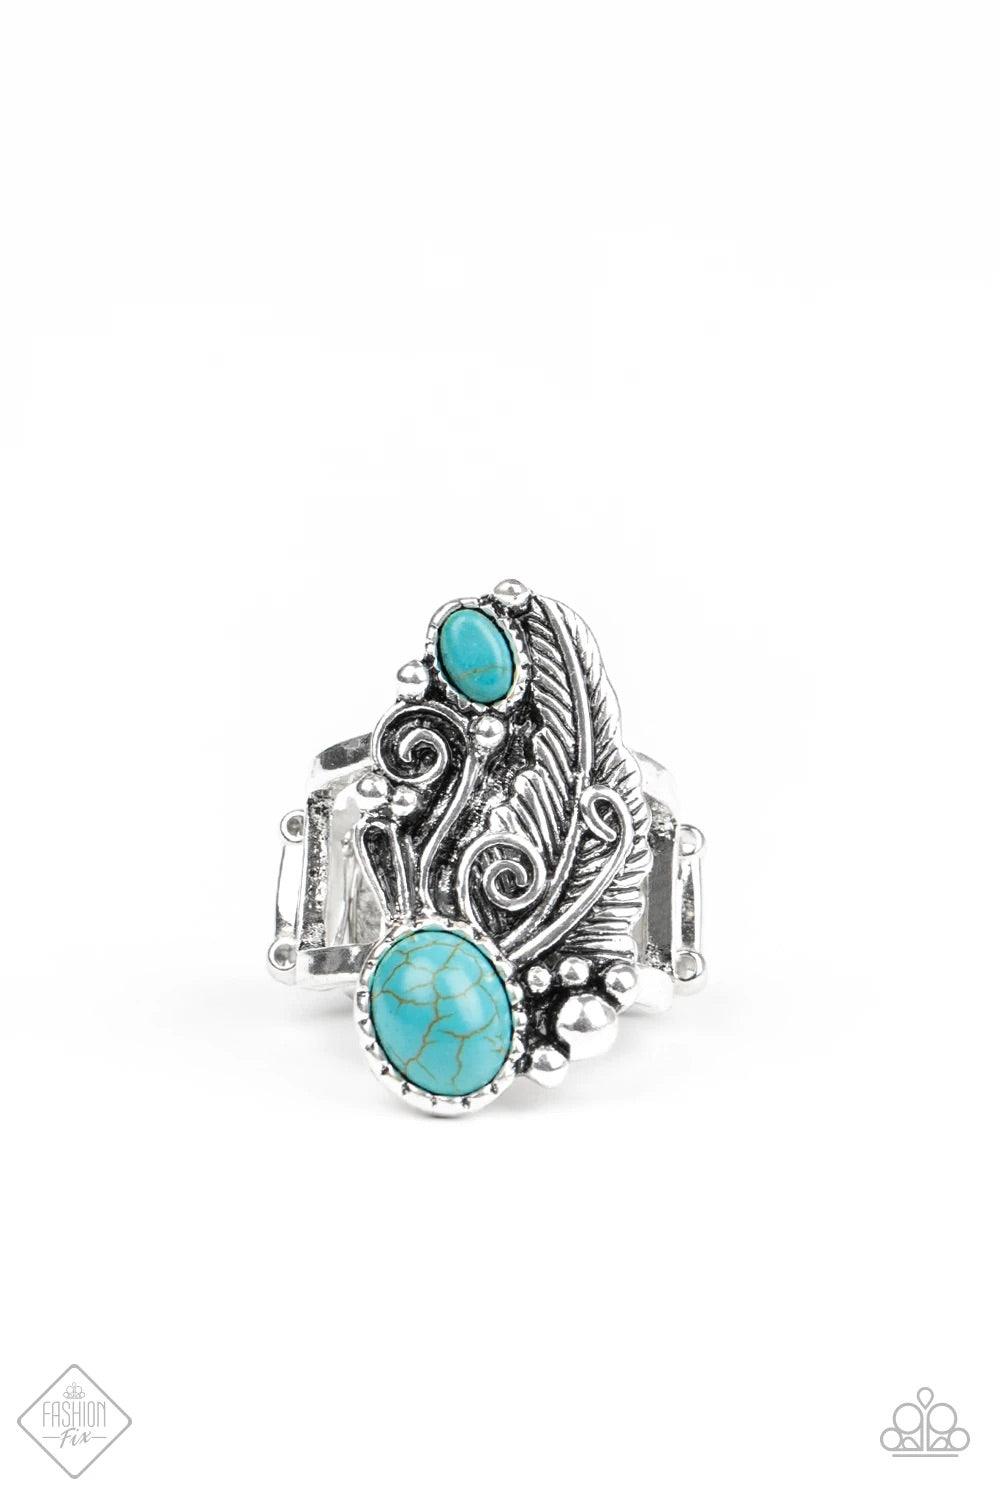 Paparazzi Accessories Desert Nest ~Blue Two oval turquoise stones are juxtaposed against a whimsical silver feather backdrop, creating a unique centerpiece atop the finger. Features a stretchy band for a flexible fit. Sold as one individual ring. Jewelry